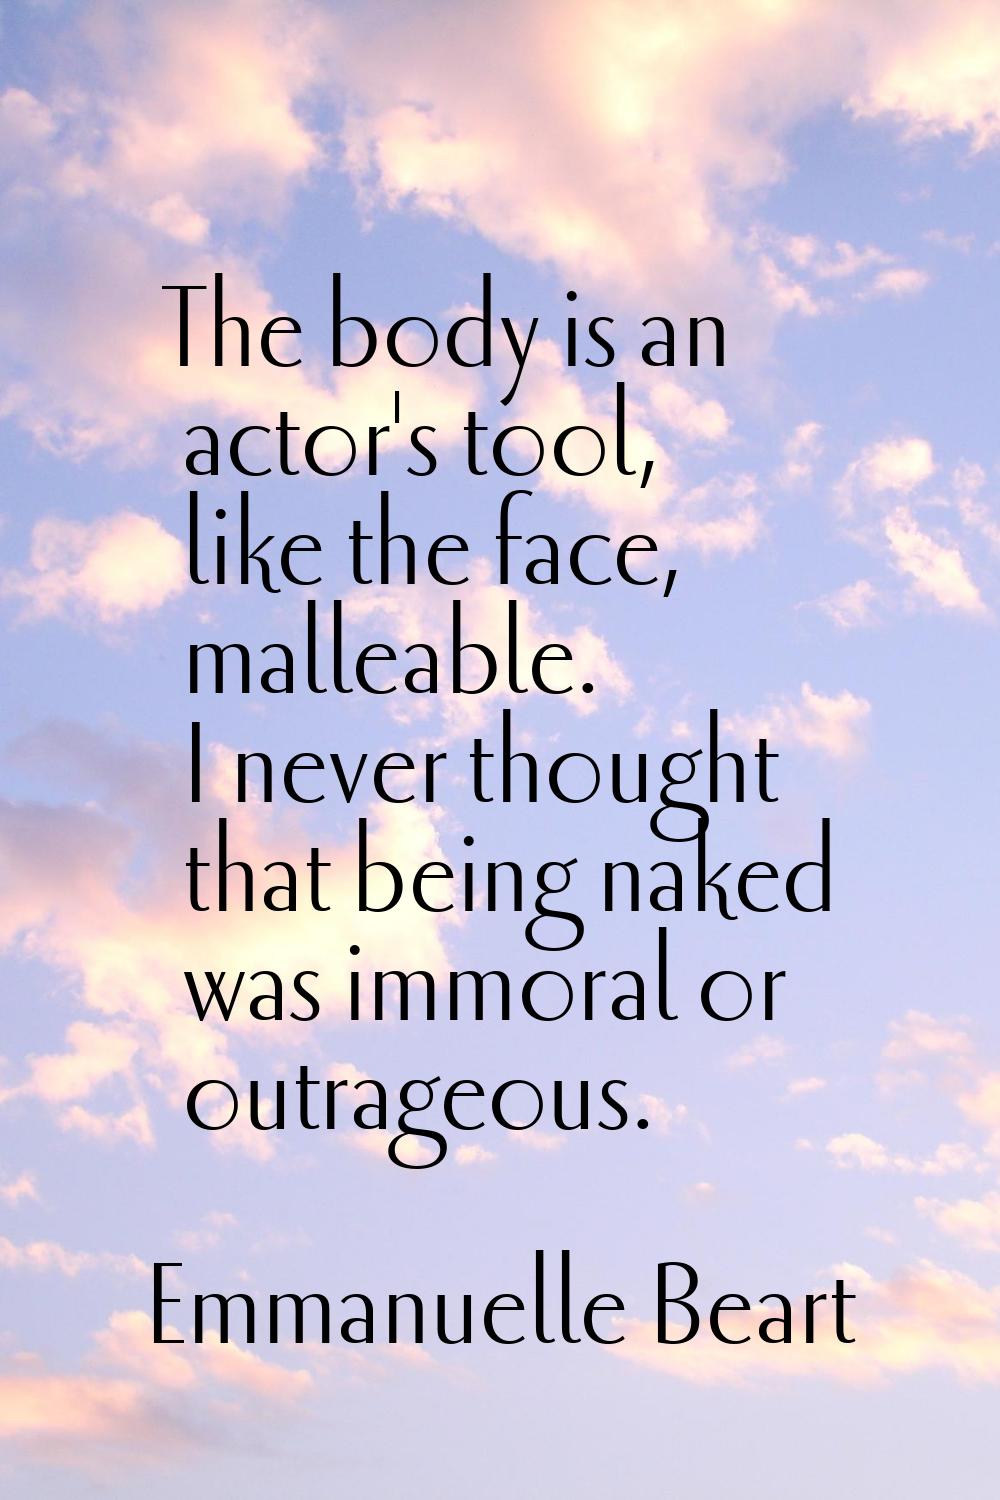 The body is an actor's tool, like the face, malleable. I never thought that being naked was immoral